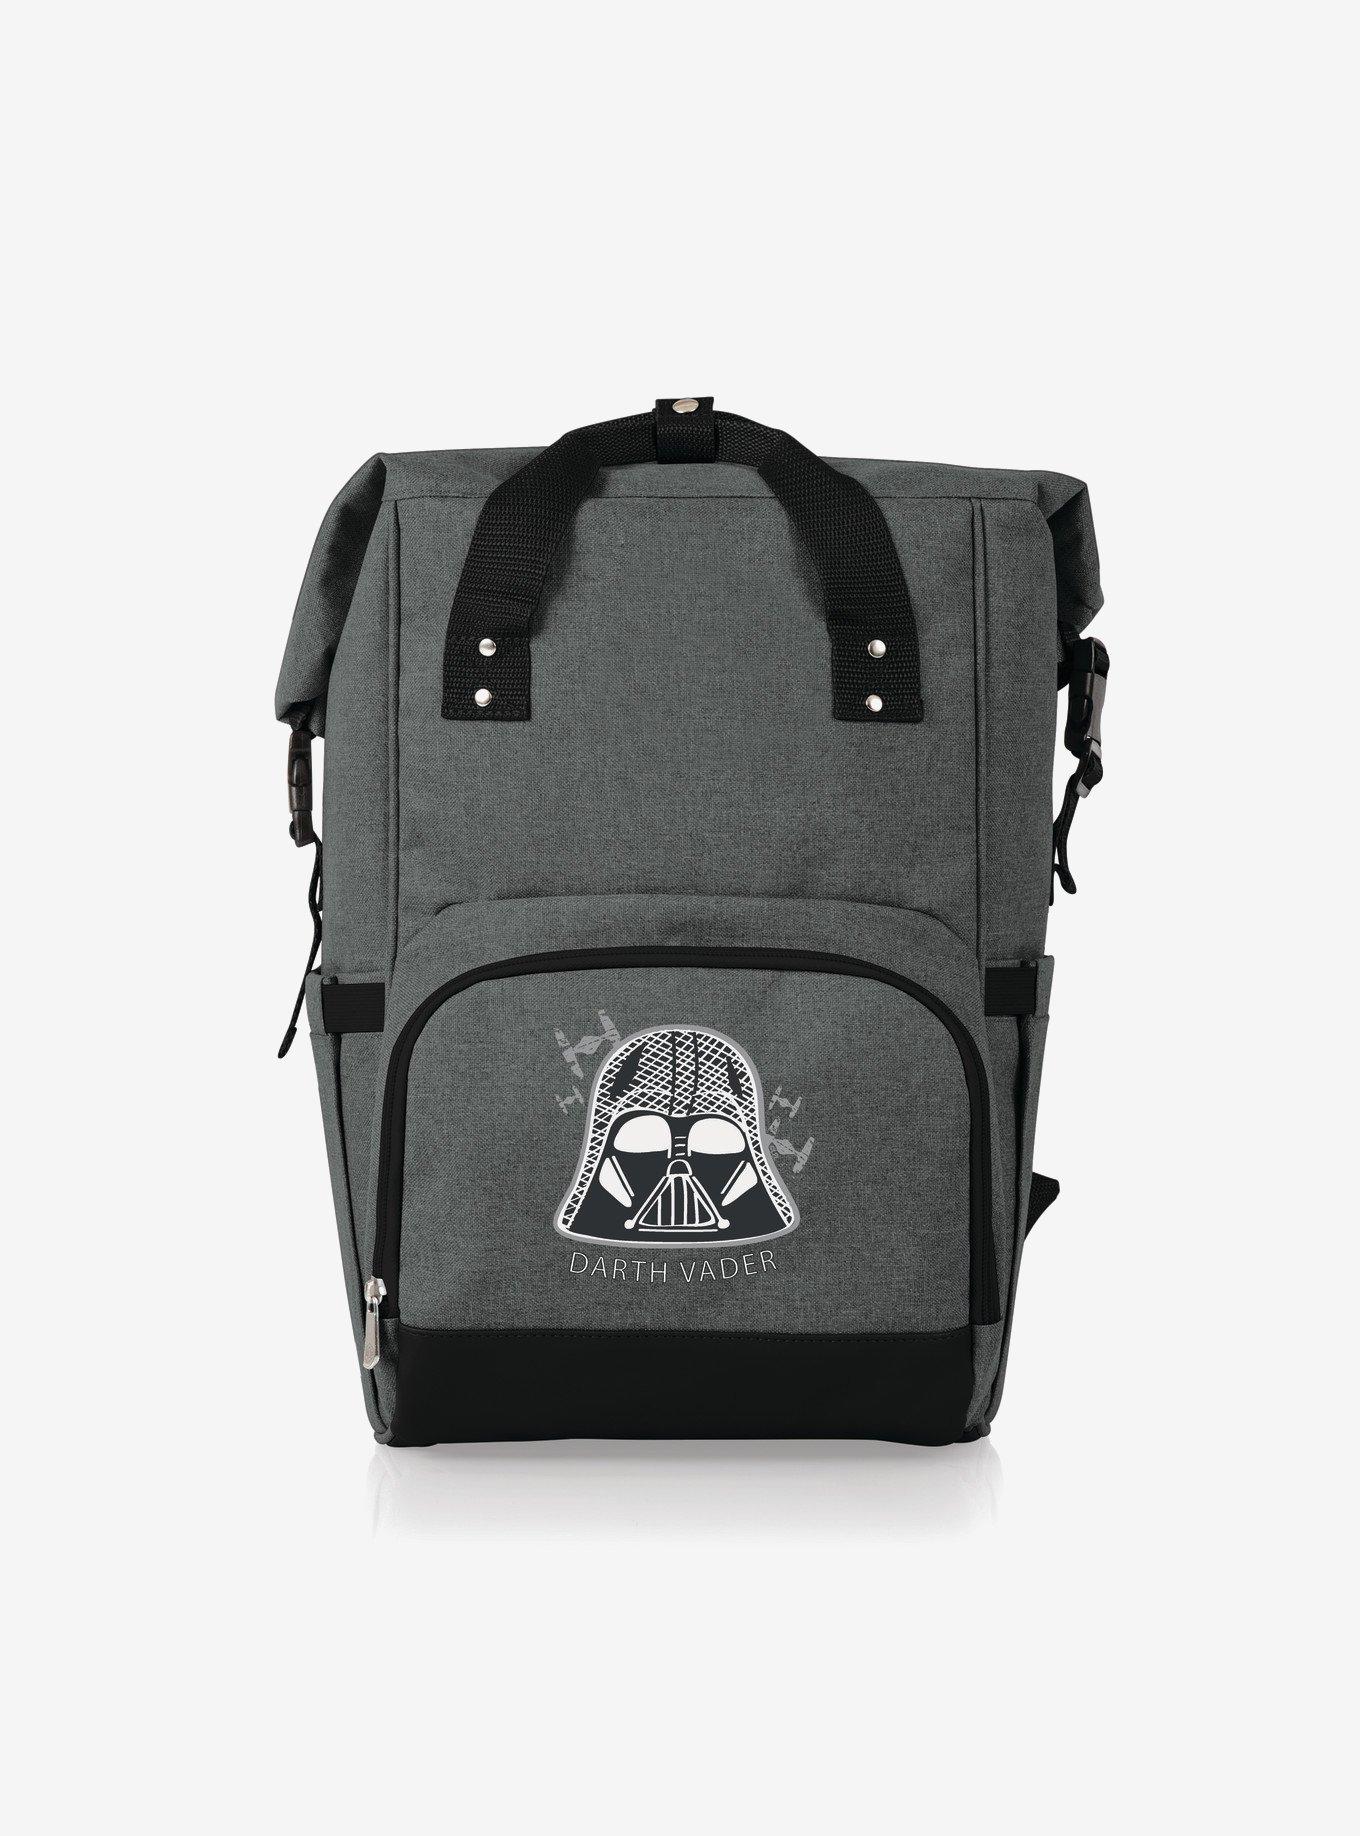 Loungefly Star Wars Darth Vader Floral Mini Backpack - BoxLunch